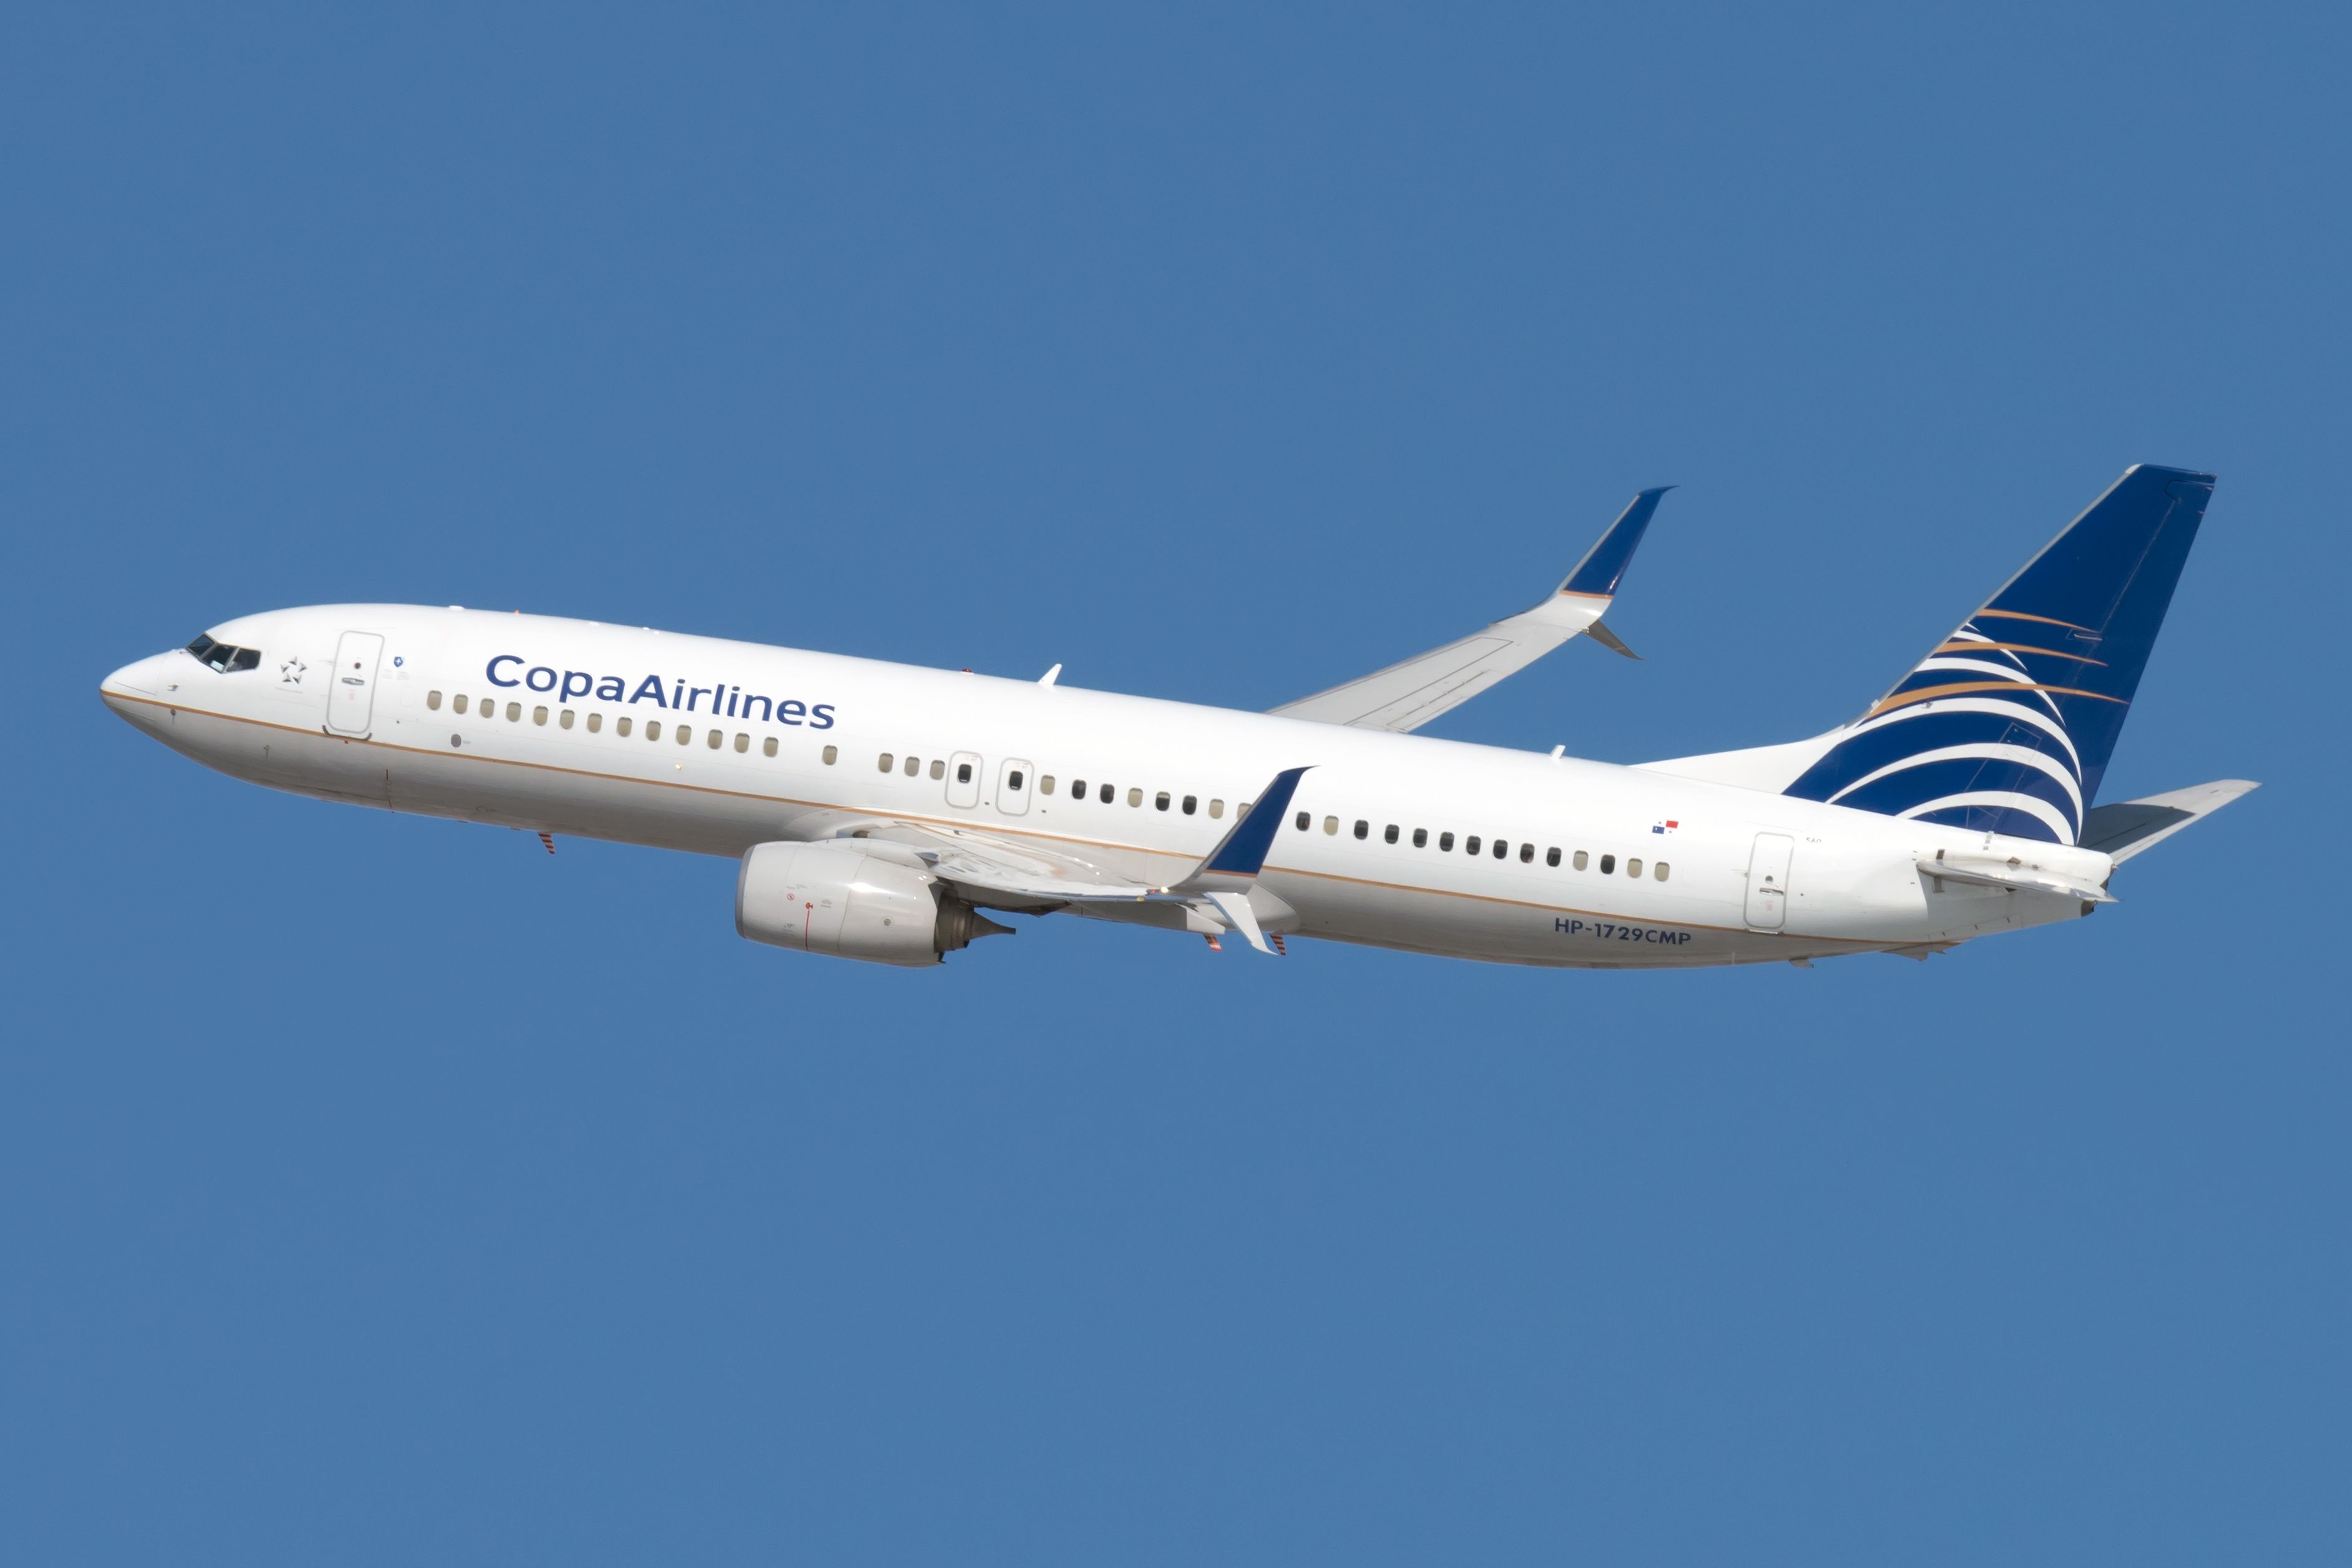 A Copa Airlines Boeing 737 flying.